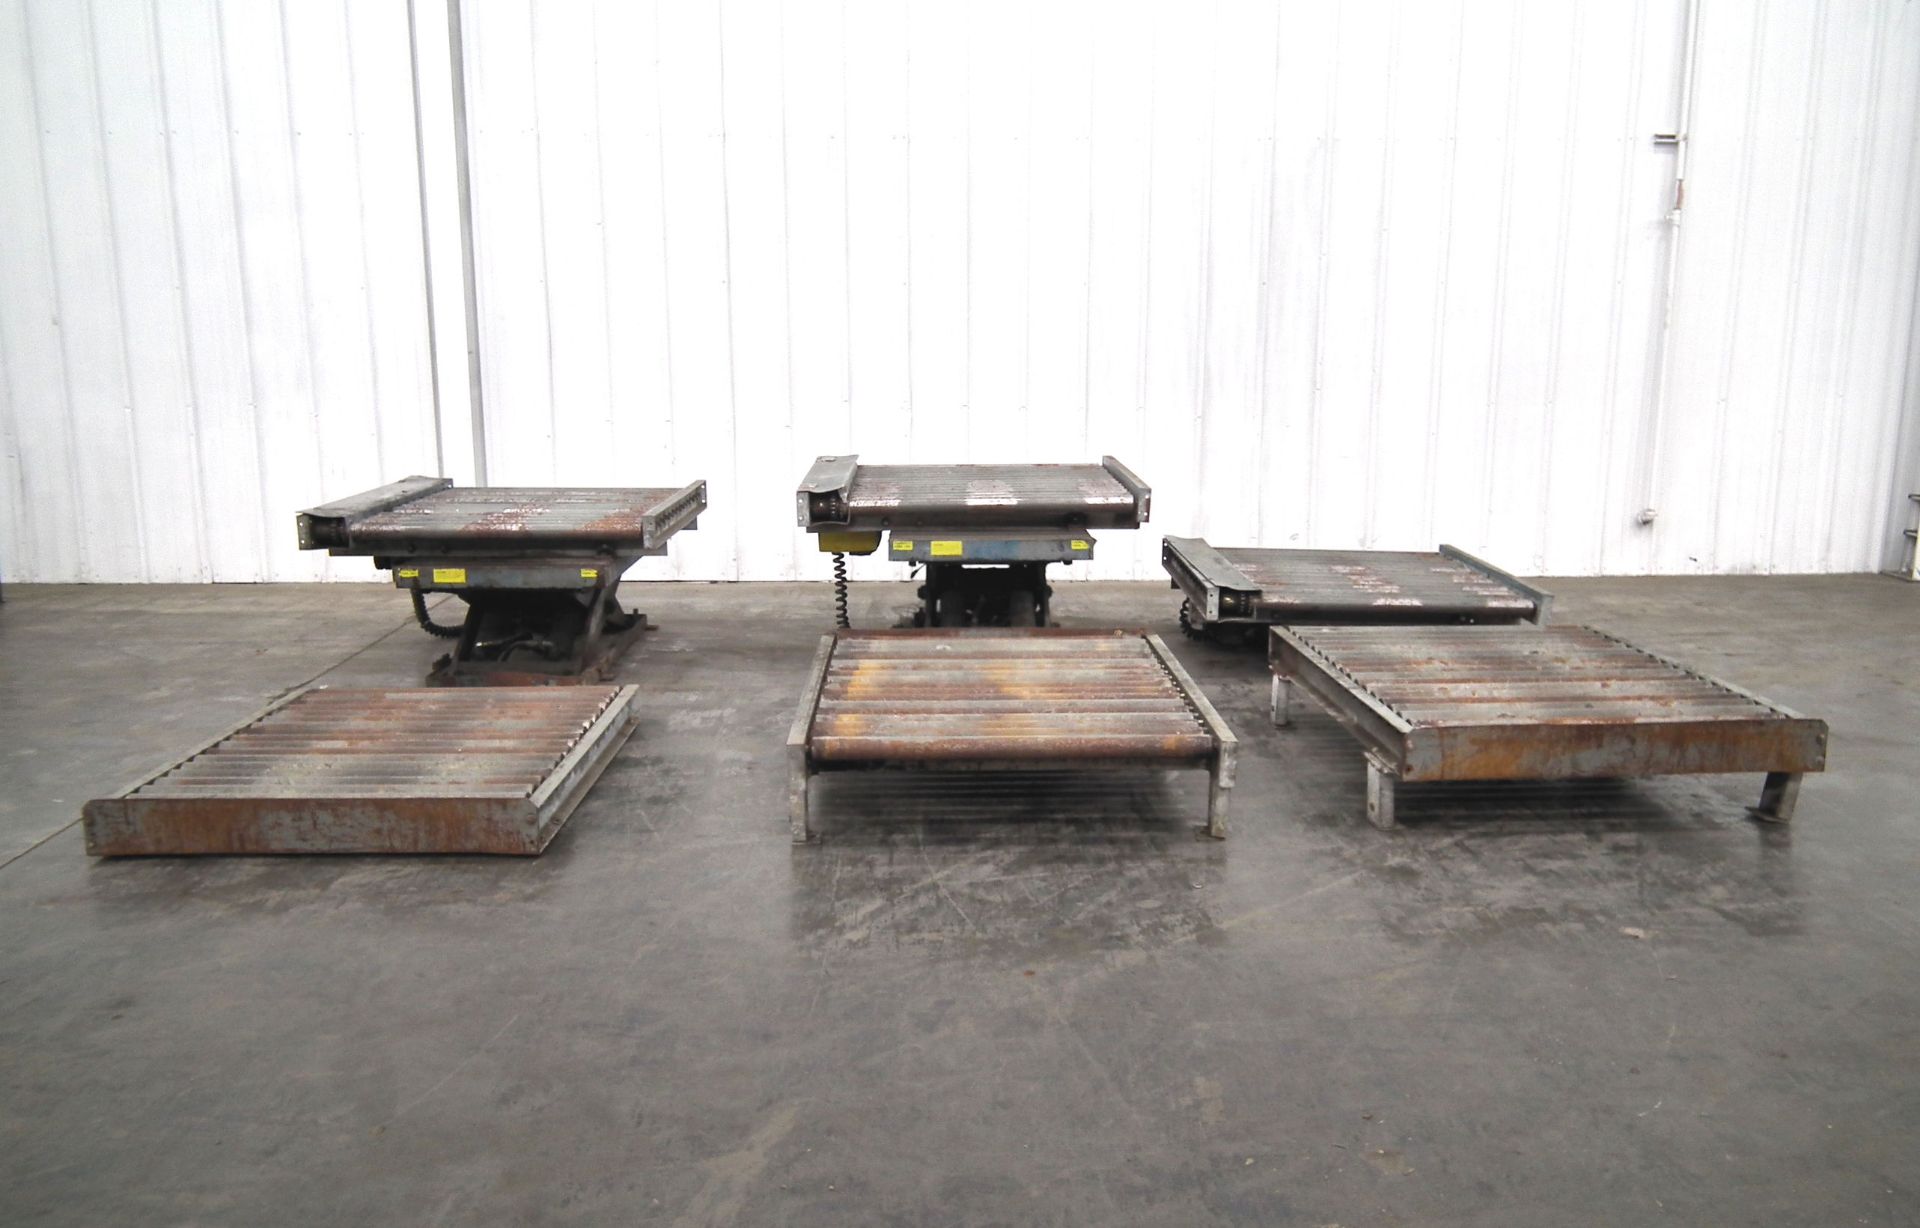 Pallet Conveyors with Southworth Scissor Lifts - Image 2 of 9